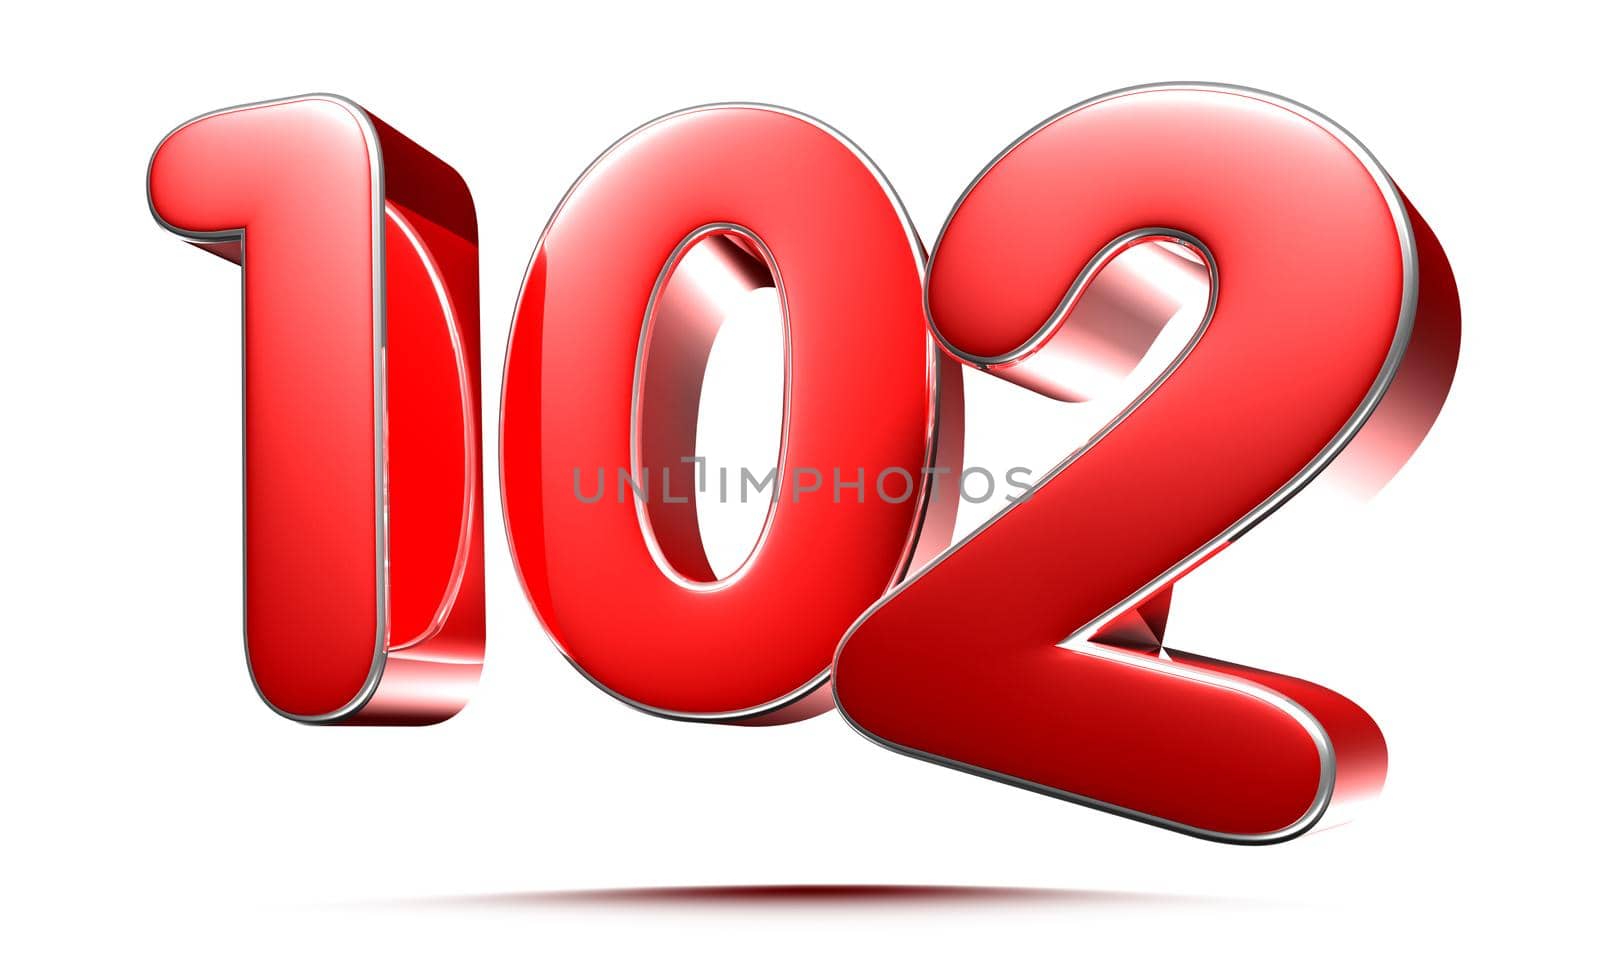 Rounded red numbers 102 on white background 3D illustration with clipping path